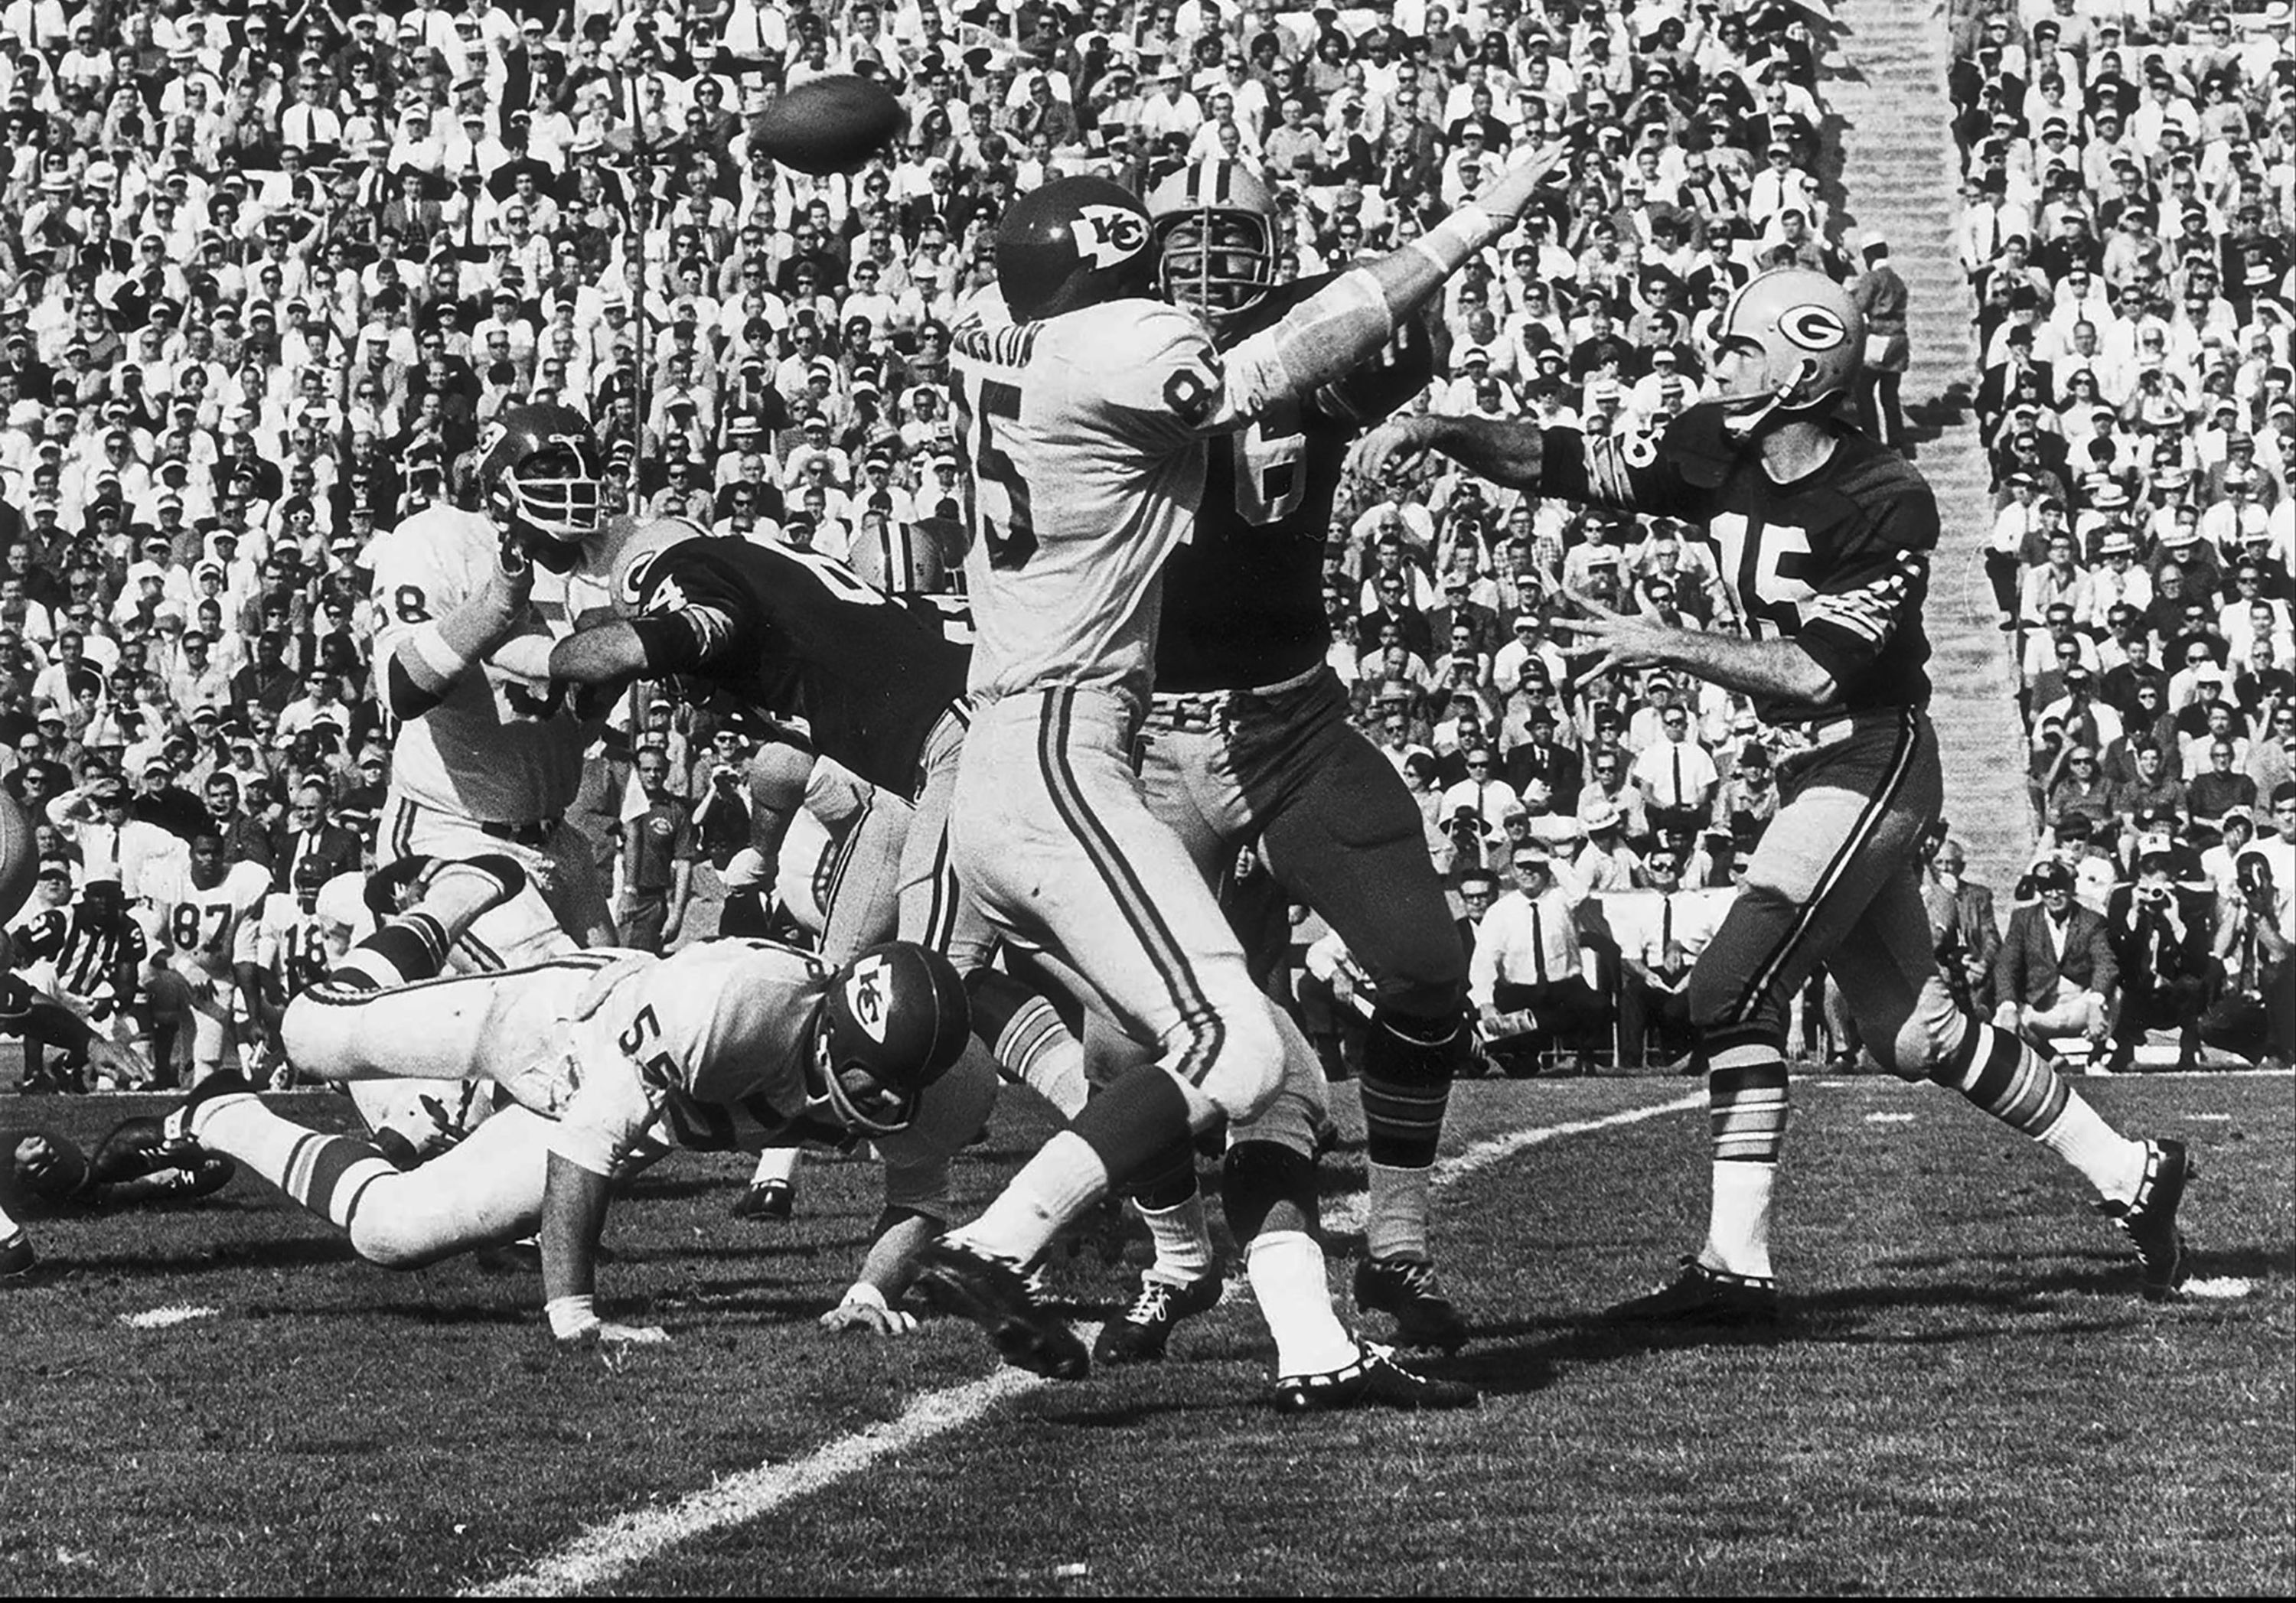 Green Bay Packers quarterback Bart Starr, right, passes the ball during the first-ever Super Bowl. Starr threw for 250 yards and two touchdowns as the Packers defeated the Kansas City Chiefs 35-10. Starr was named the game's Most Valuable Player.